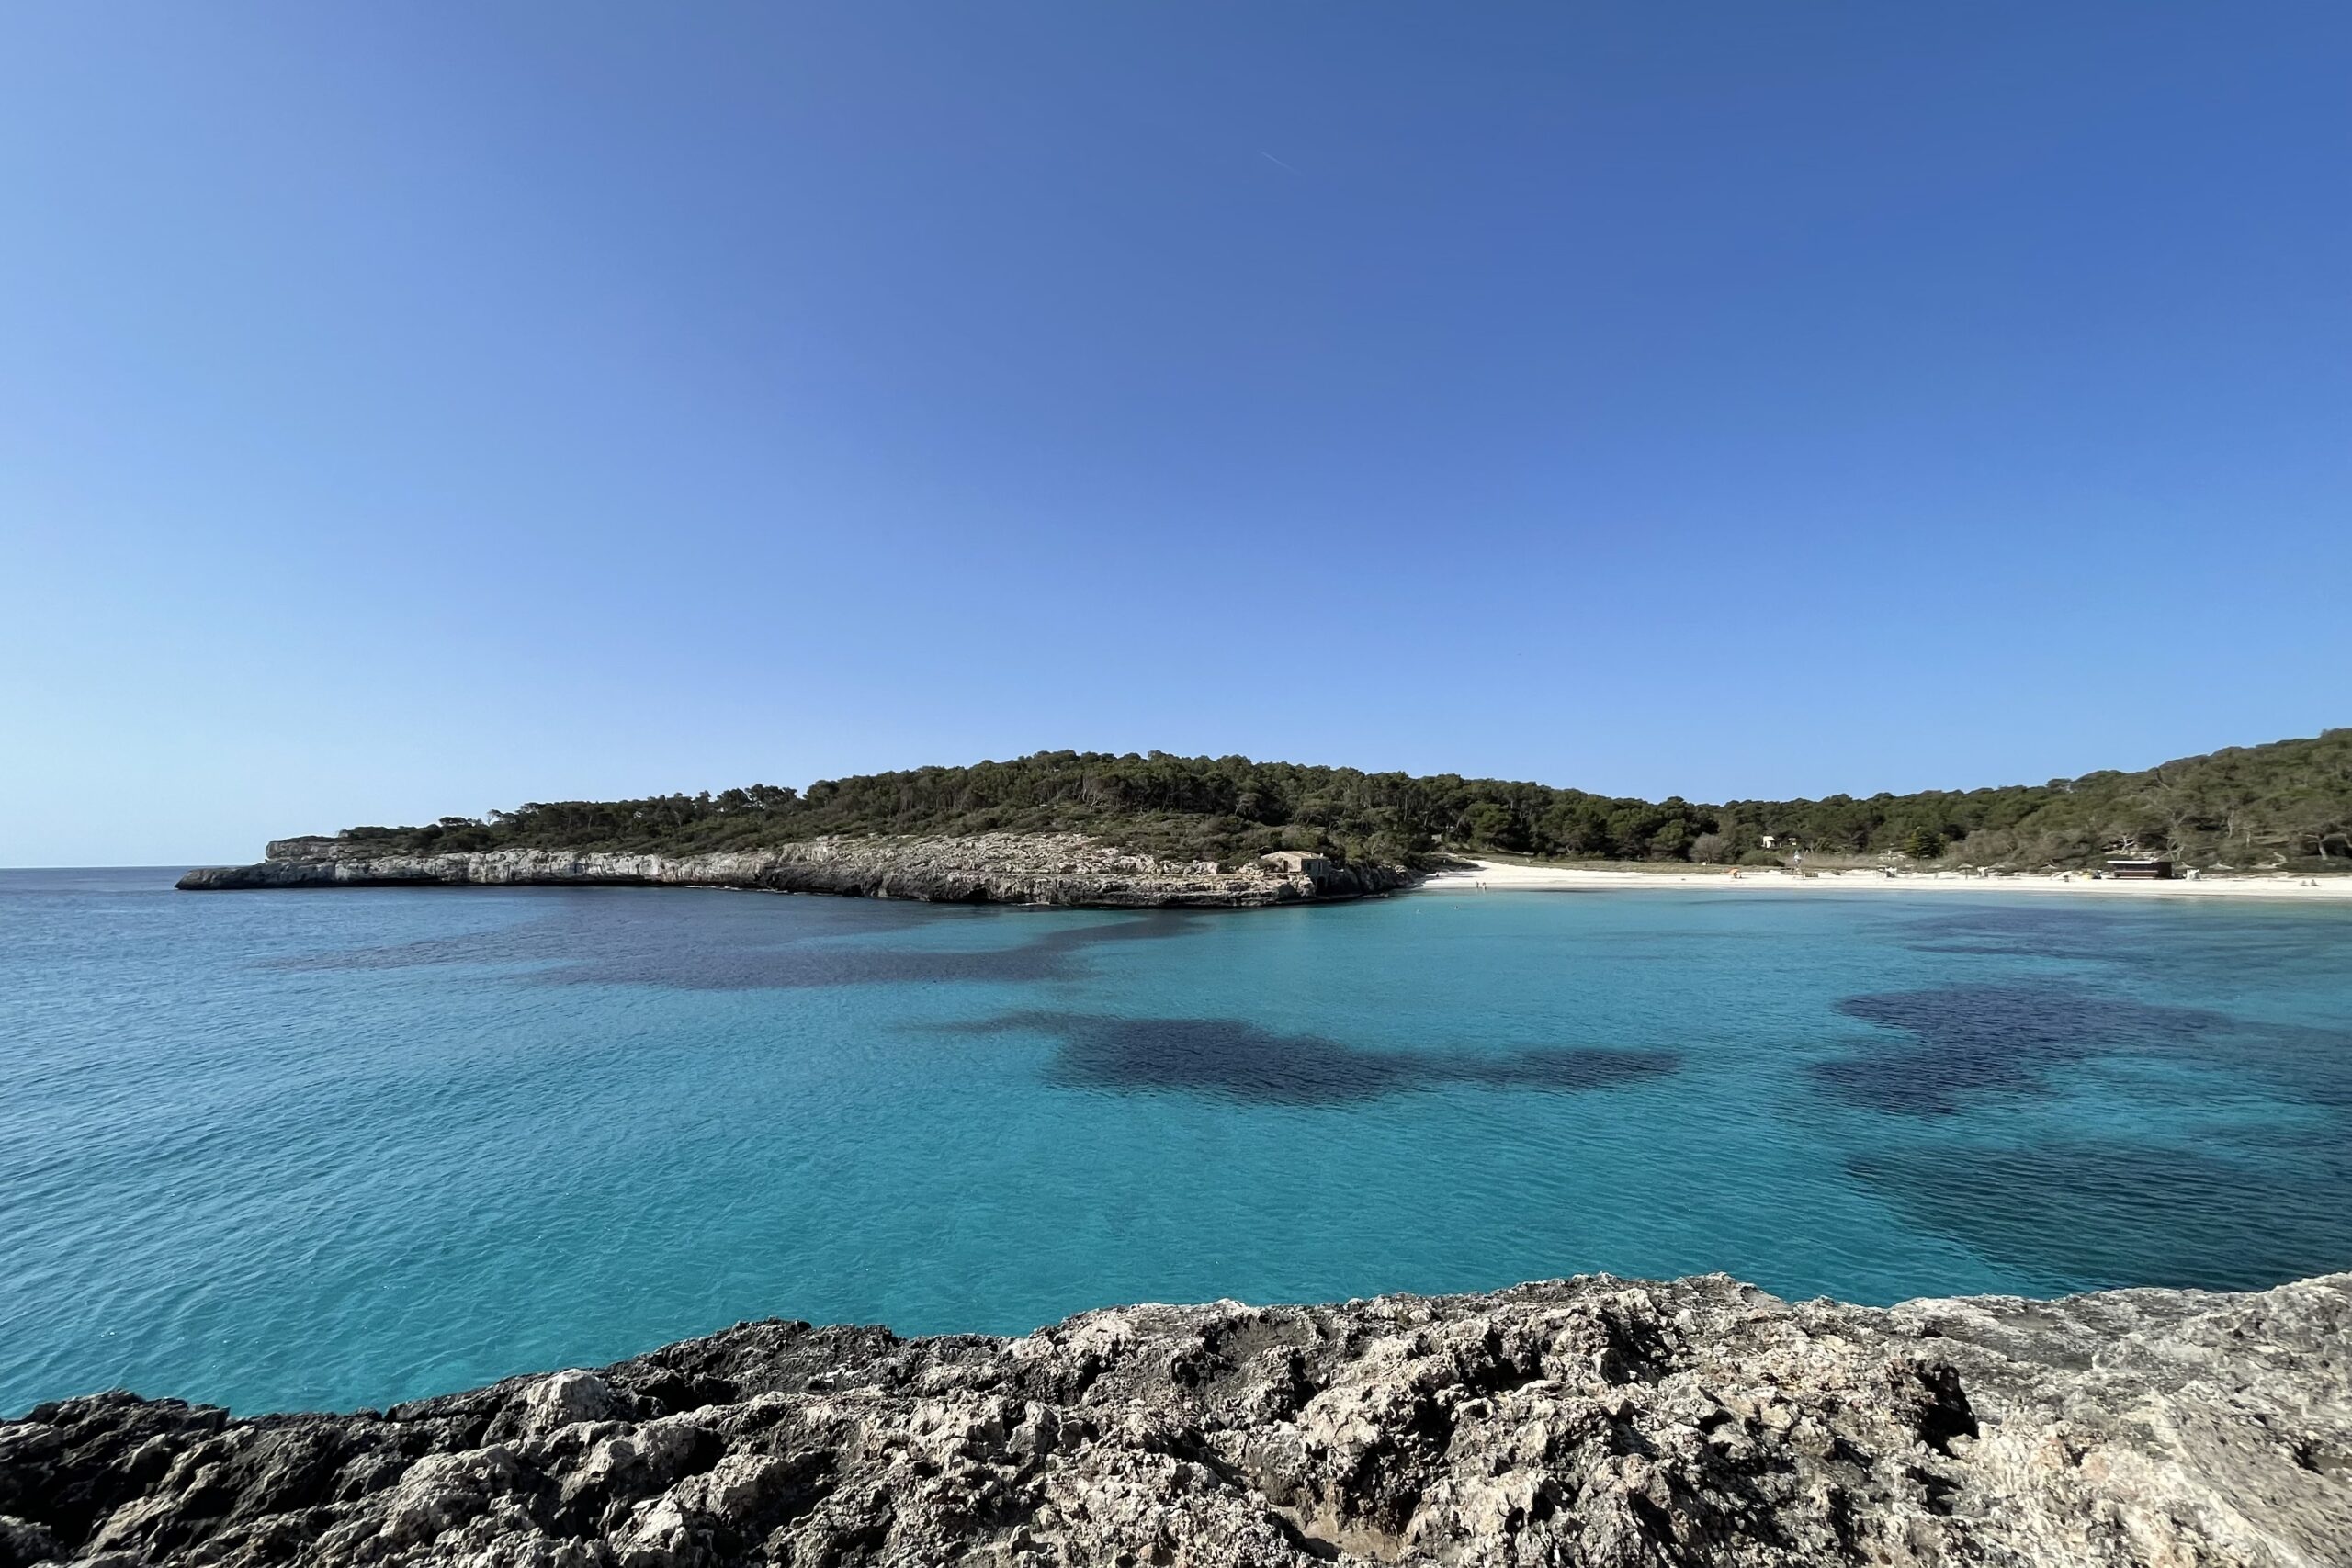 Secluded bays on Mallorca